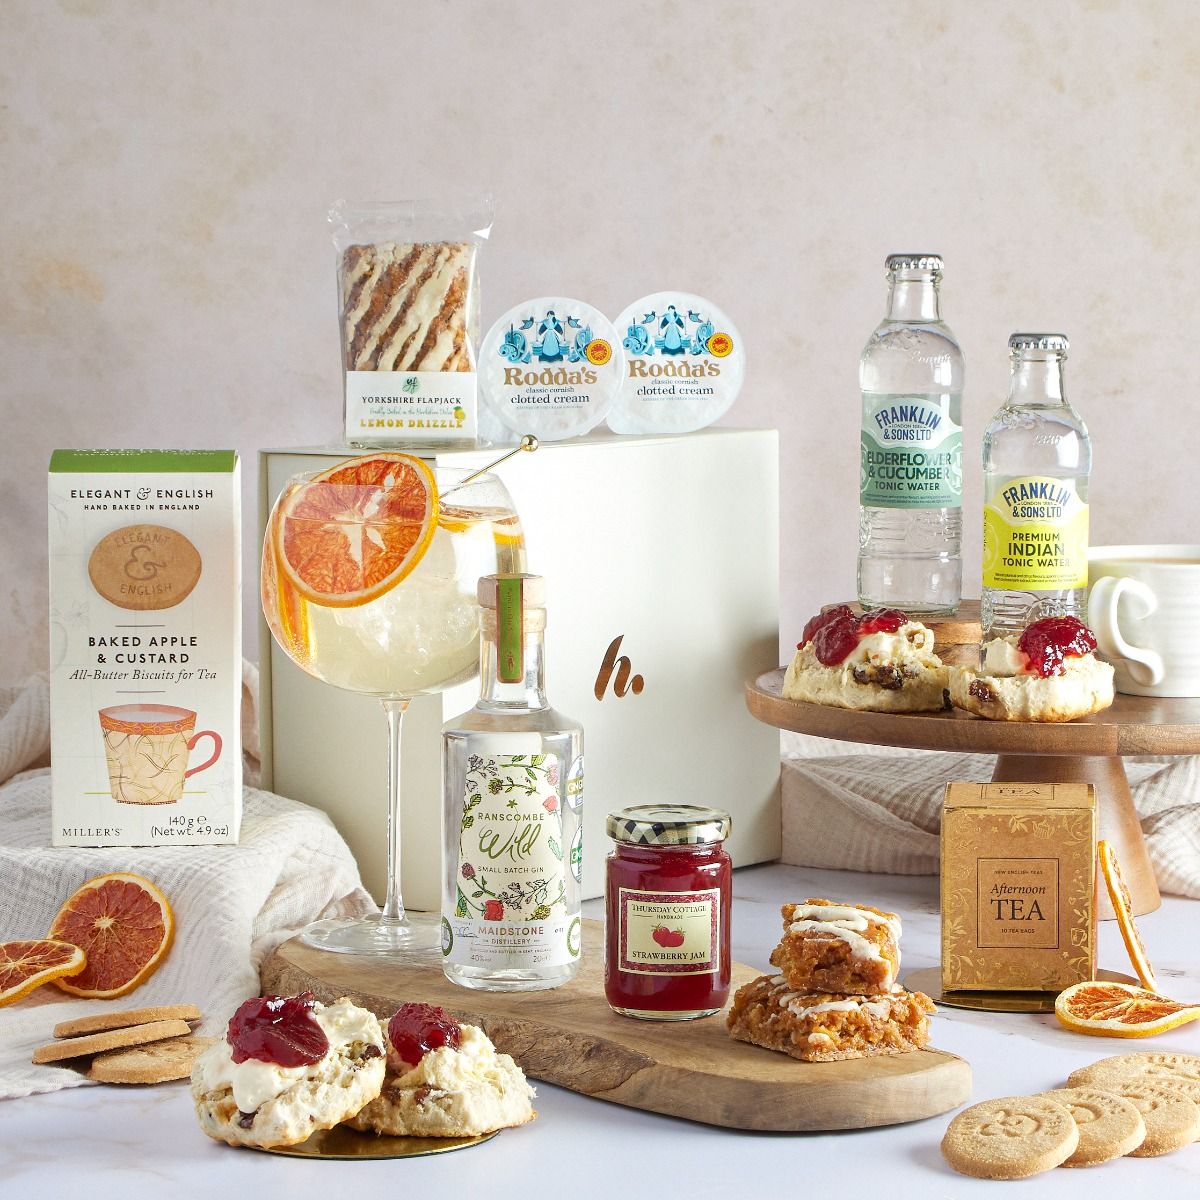 Gin Lover's Cream Tea Hamper with contents on display